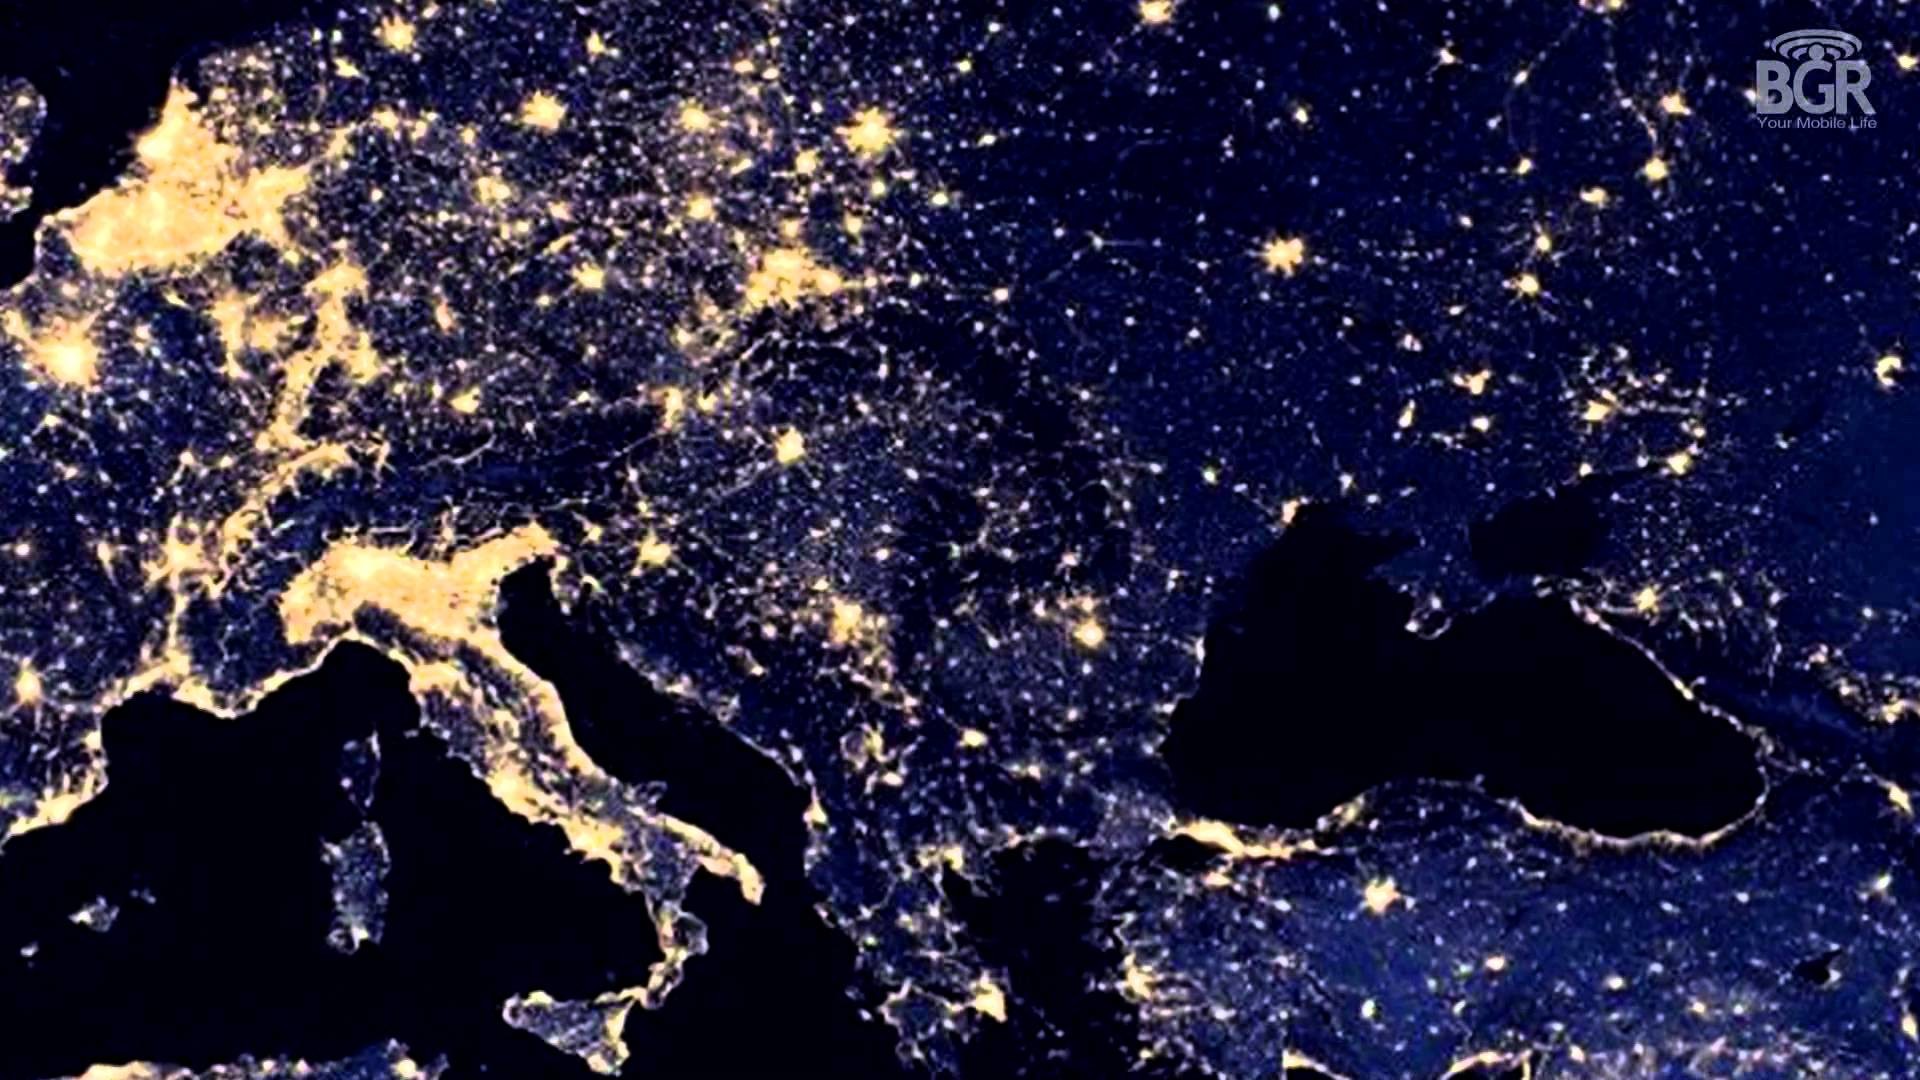 1920x1080 Google Maps lets you explore night city lights on Earth with NASANOAA's  Black Marble imagery - YouTube